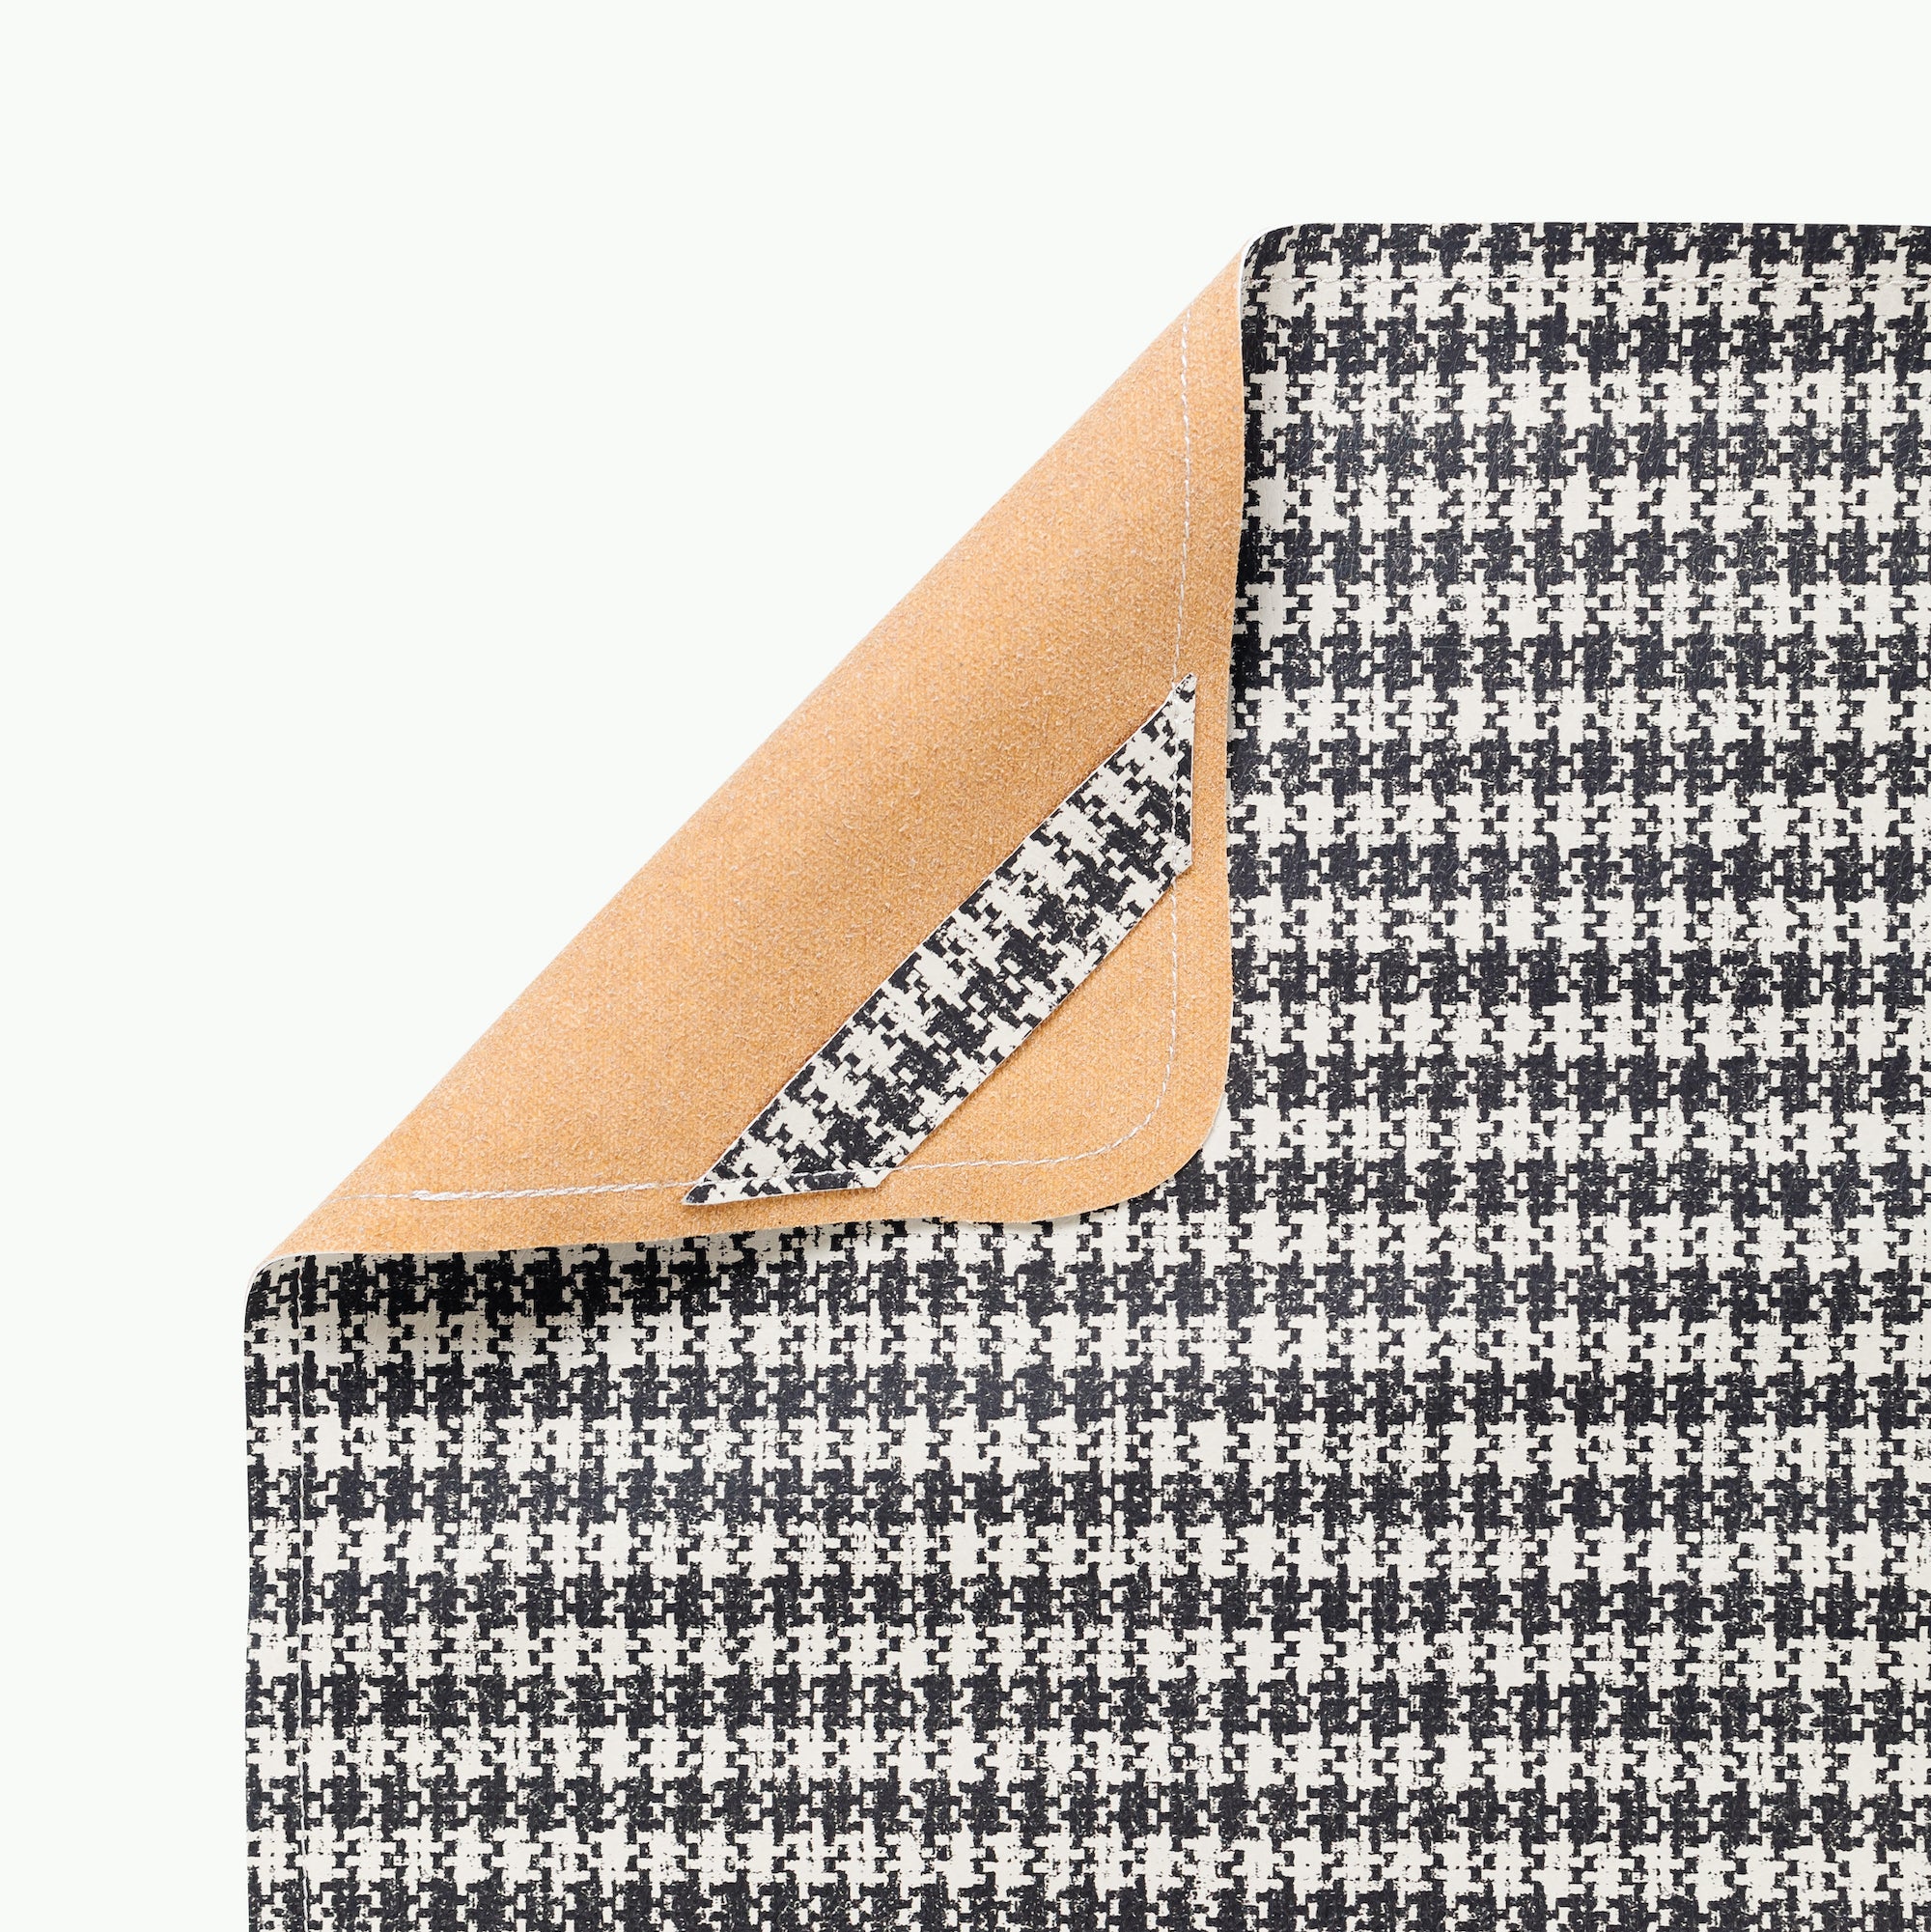 Houndstooth (on sale)@hanigng tab on  the houndstooth micro+ mat